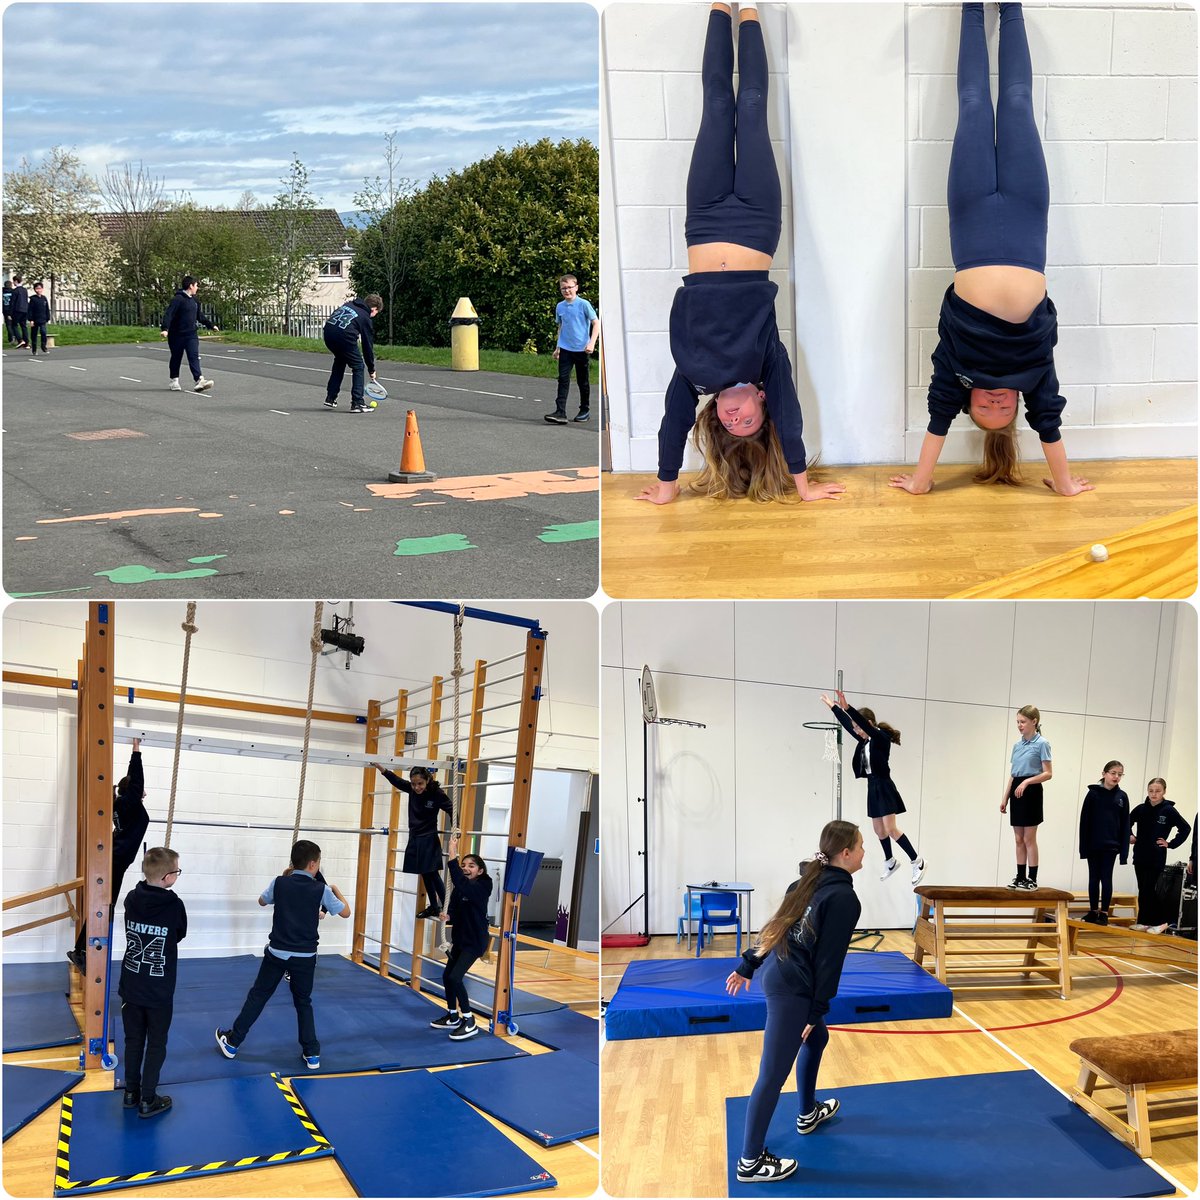 Room 10 (P7a) are loving the first day of Health Week so far with some free play PE! The wall bars were a big hit with everyone 💪🏻. #BankheadWillSOAR